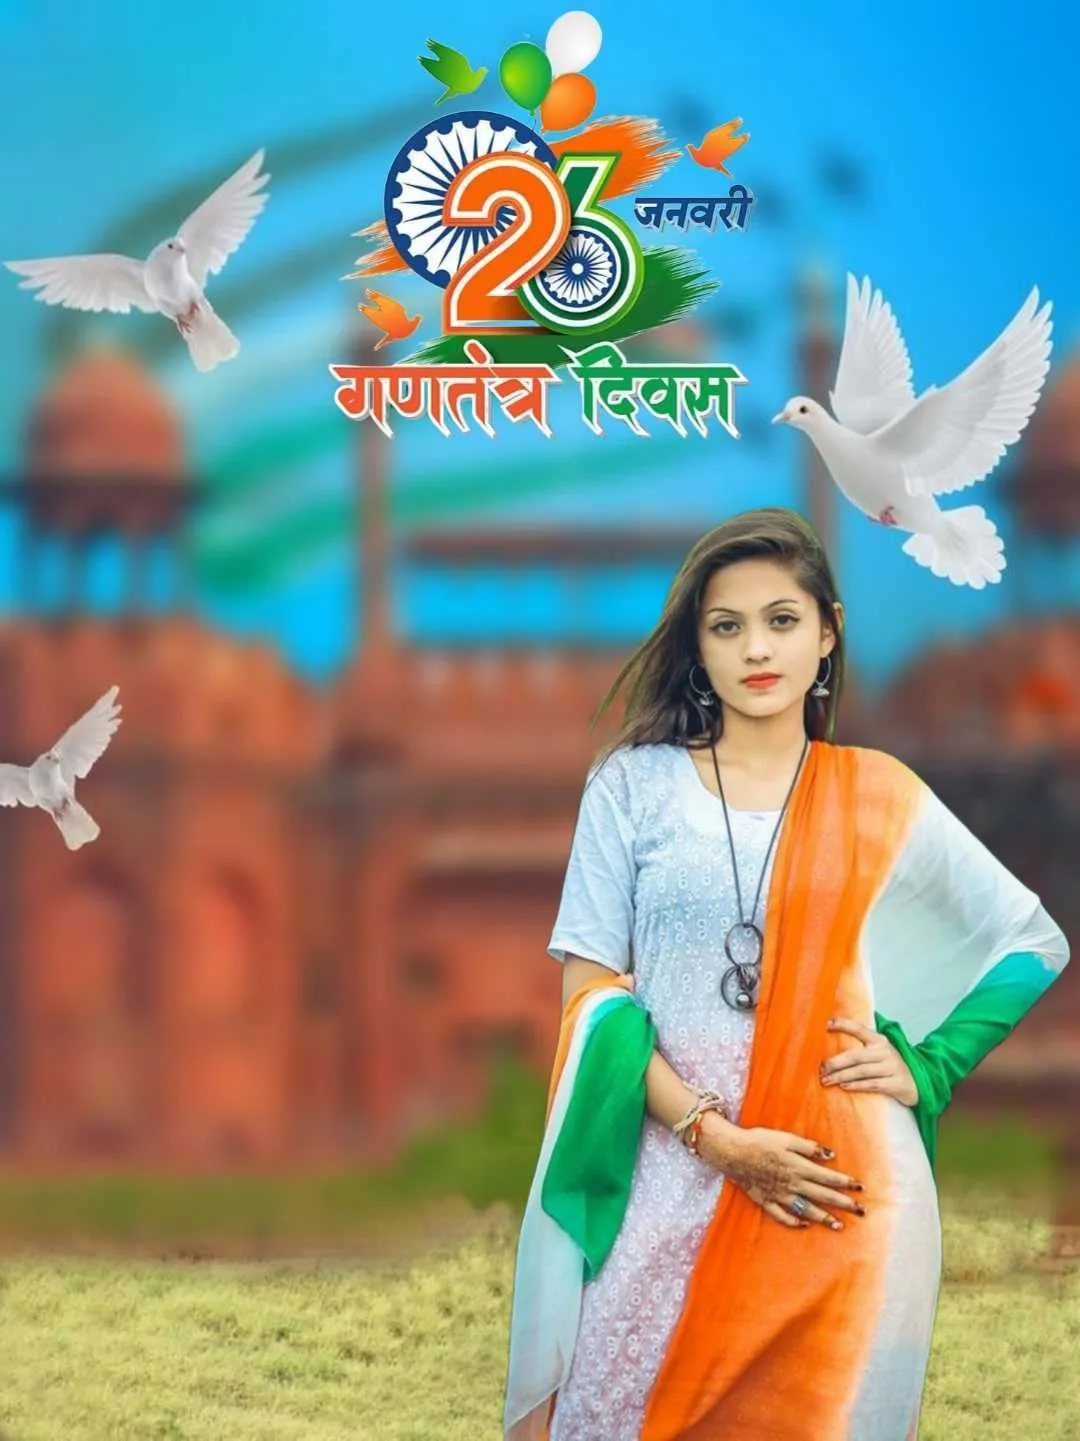 Happy Republic day to CB Girl Editing Background